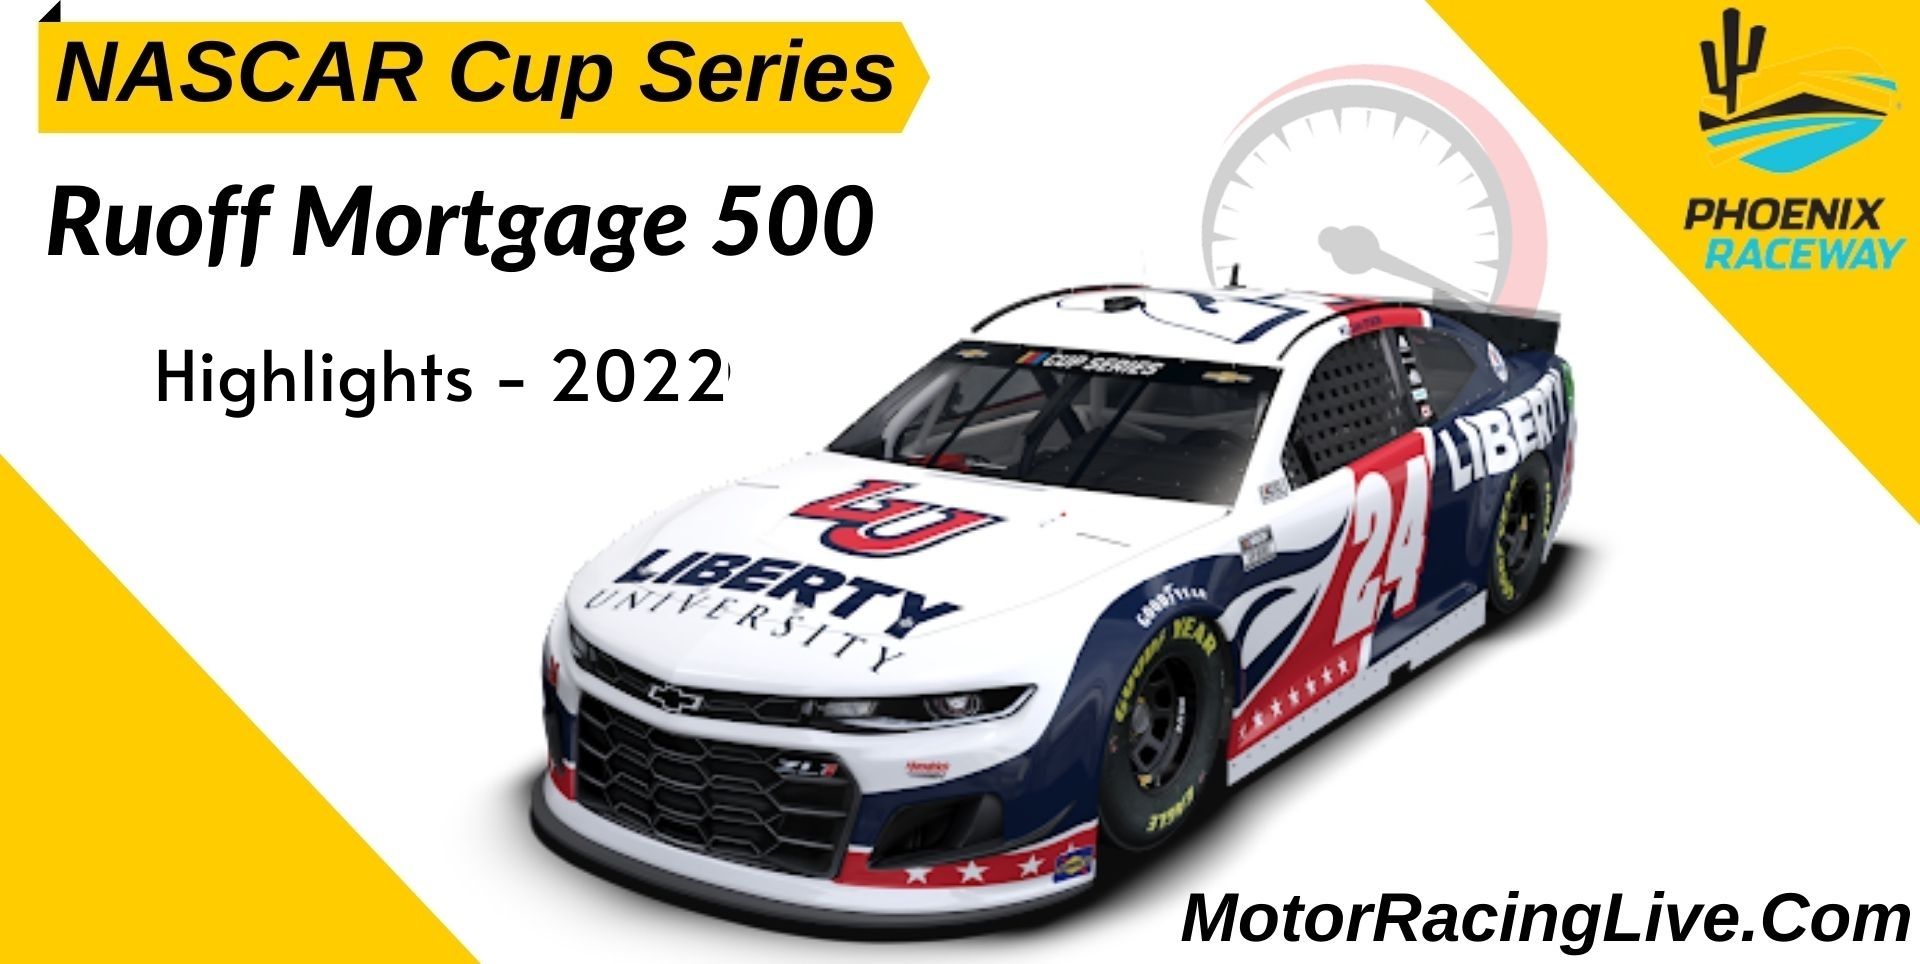 Ruoff Mortgage 500 Highlights 2022 NASCAR Cup Series